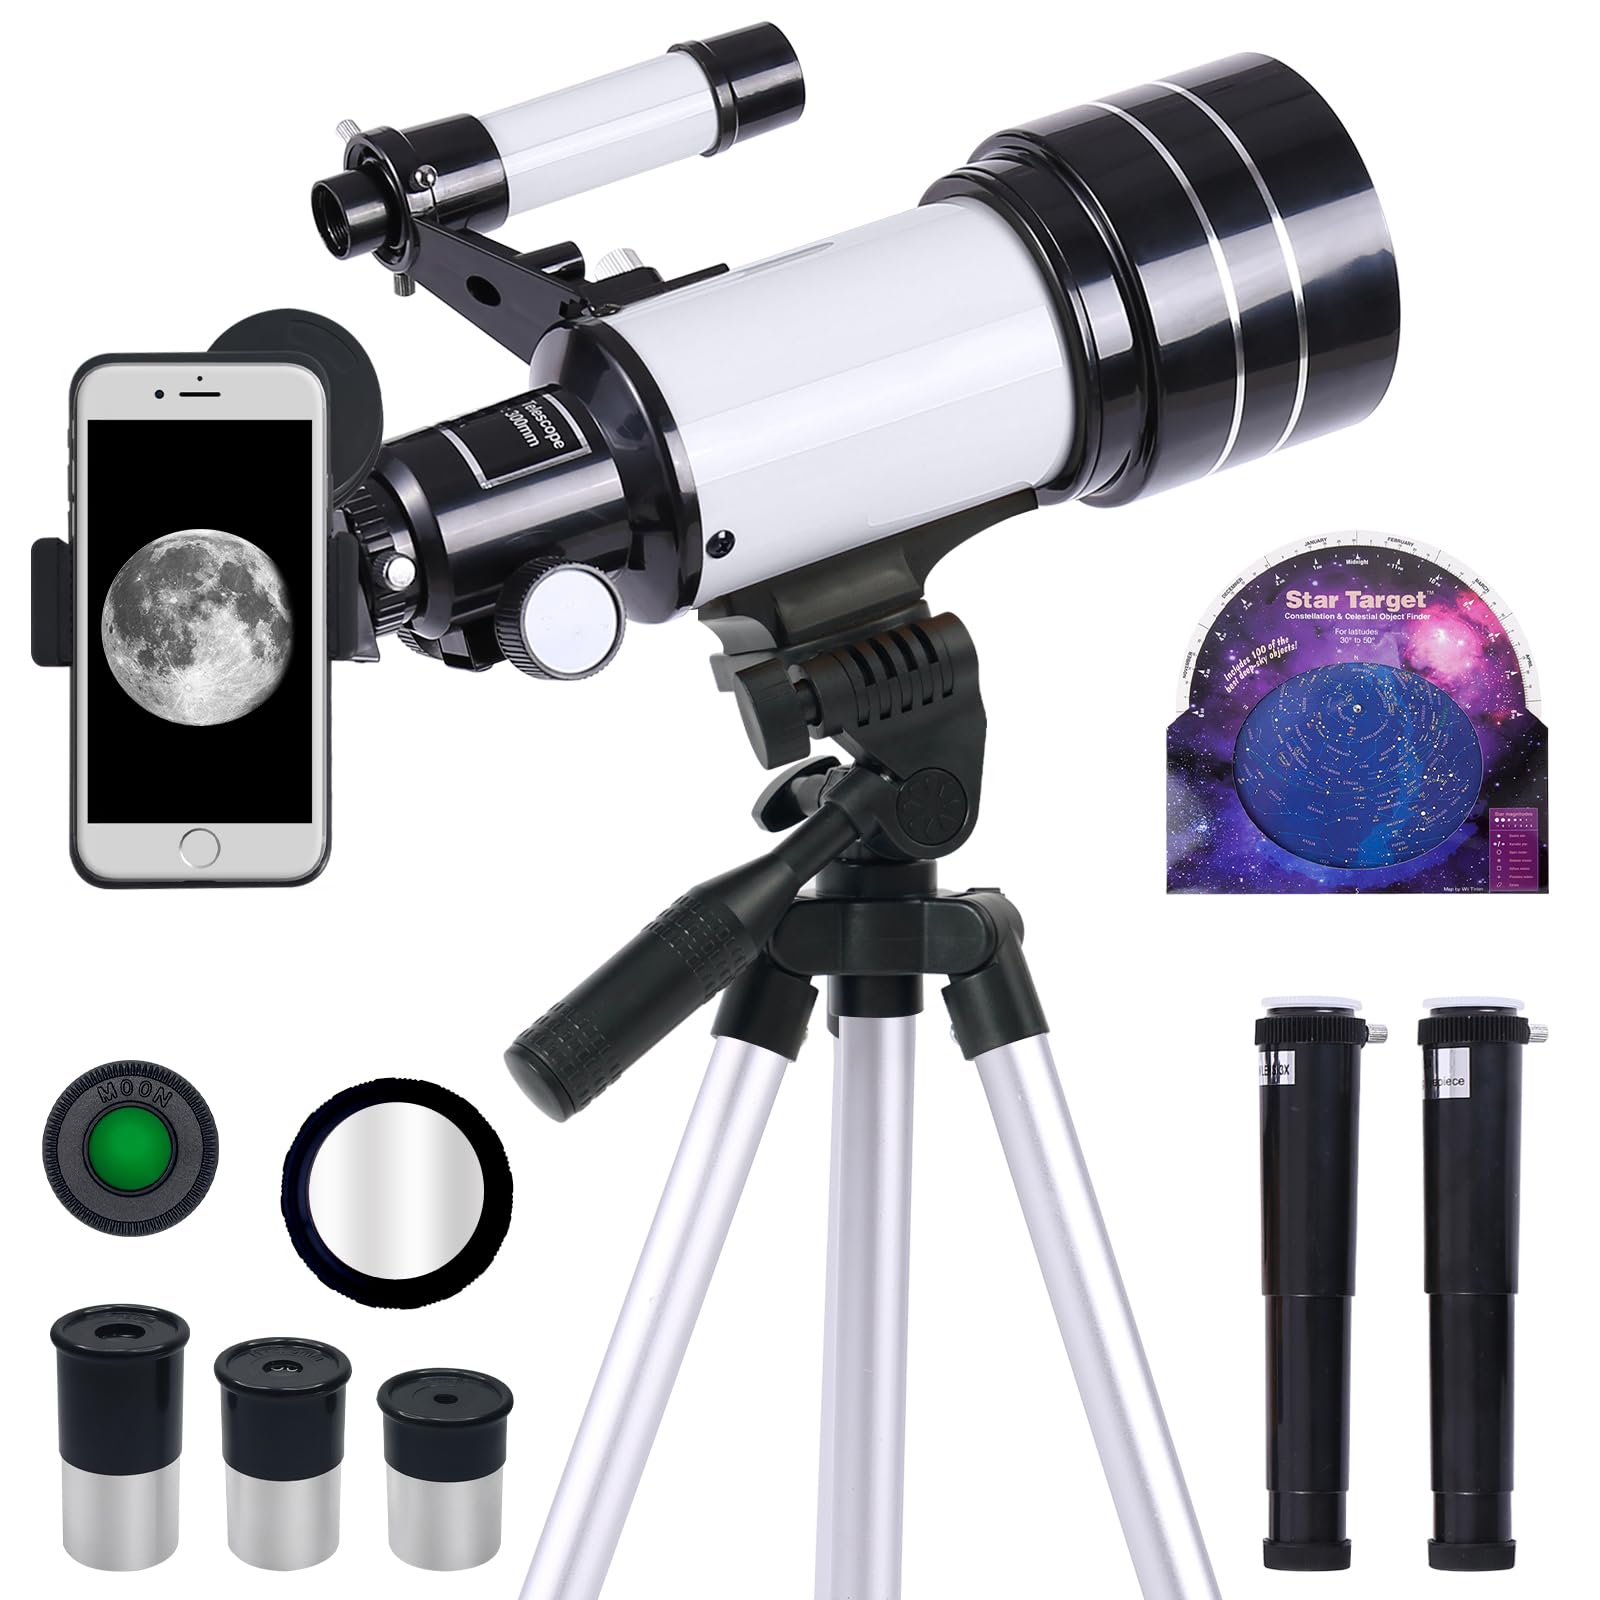 Telescope for Adults & Kids, 70mm Aperture Professional Astronomy Refractor Telescope for Beginners, 300mm Portable Refractor Telescope with AZ Mount & Phone Adapter (Orange)